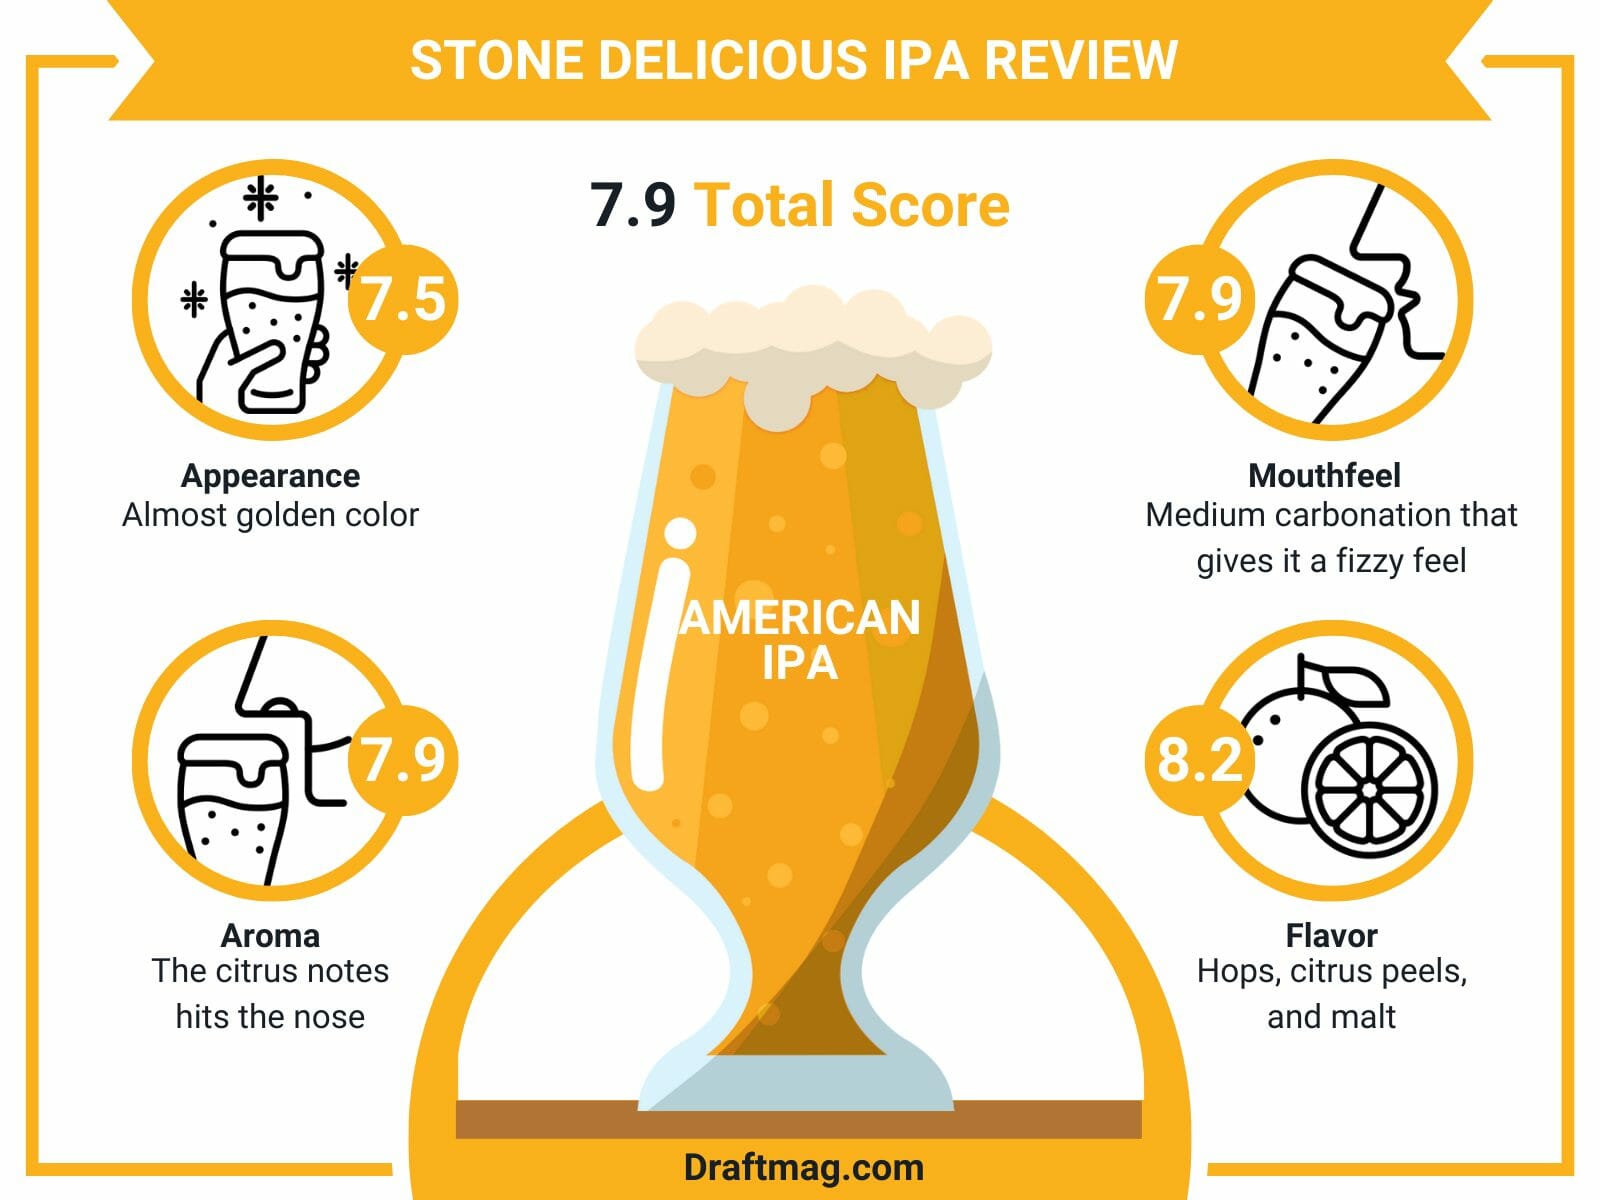 Stone delicious ipa review infographic